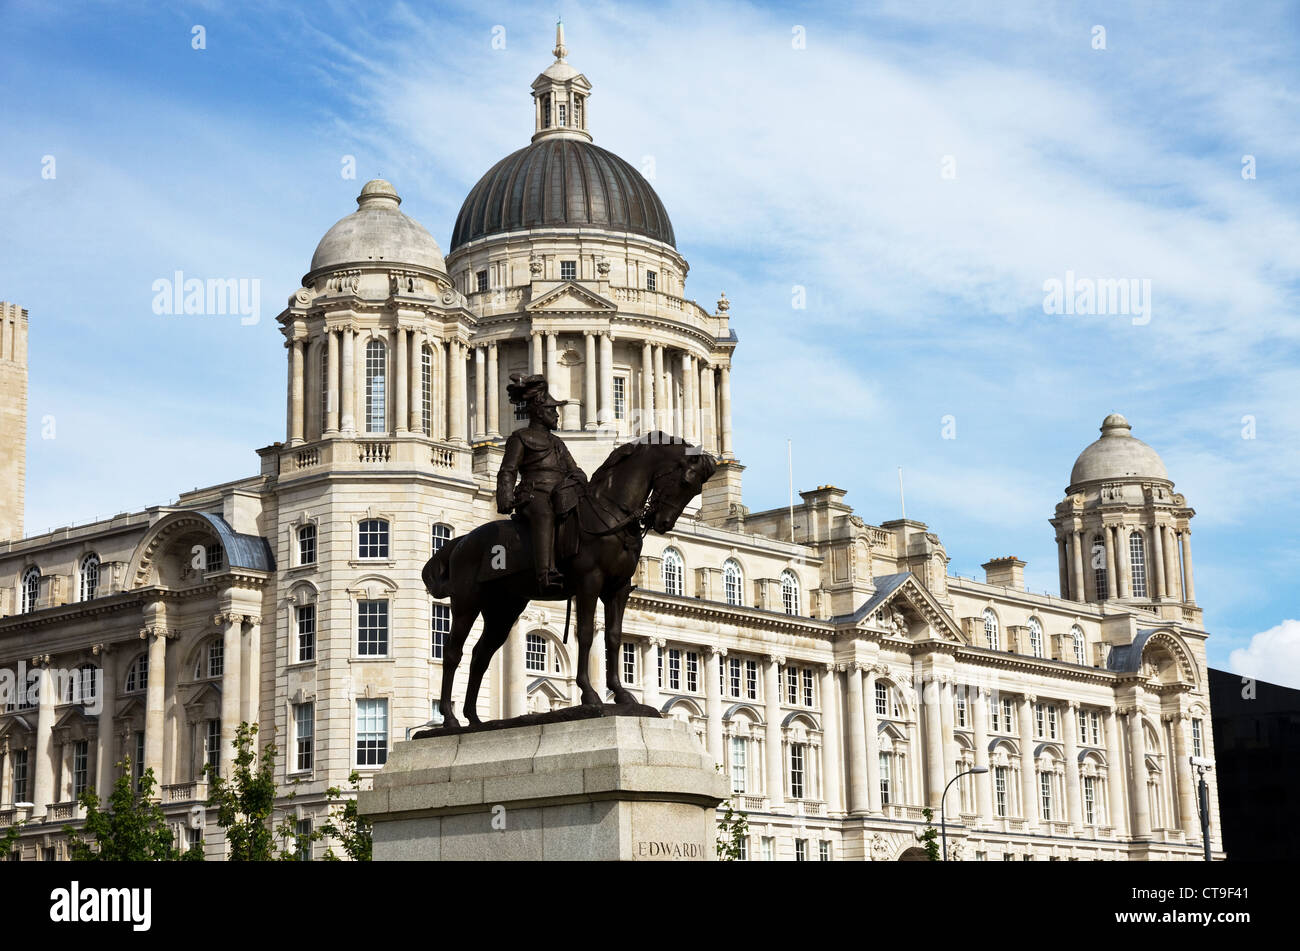 Bronze statue of King Edward 7th and the Port of Liverpool Building, Liverpool, Merseyside, England Stock Photo